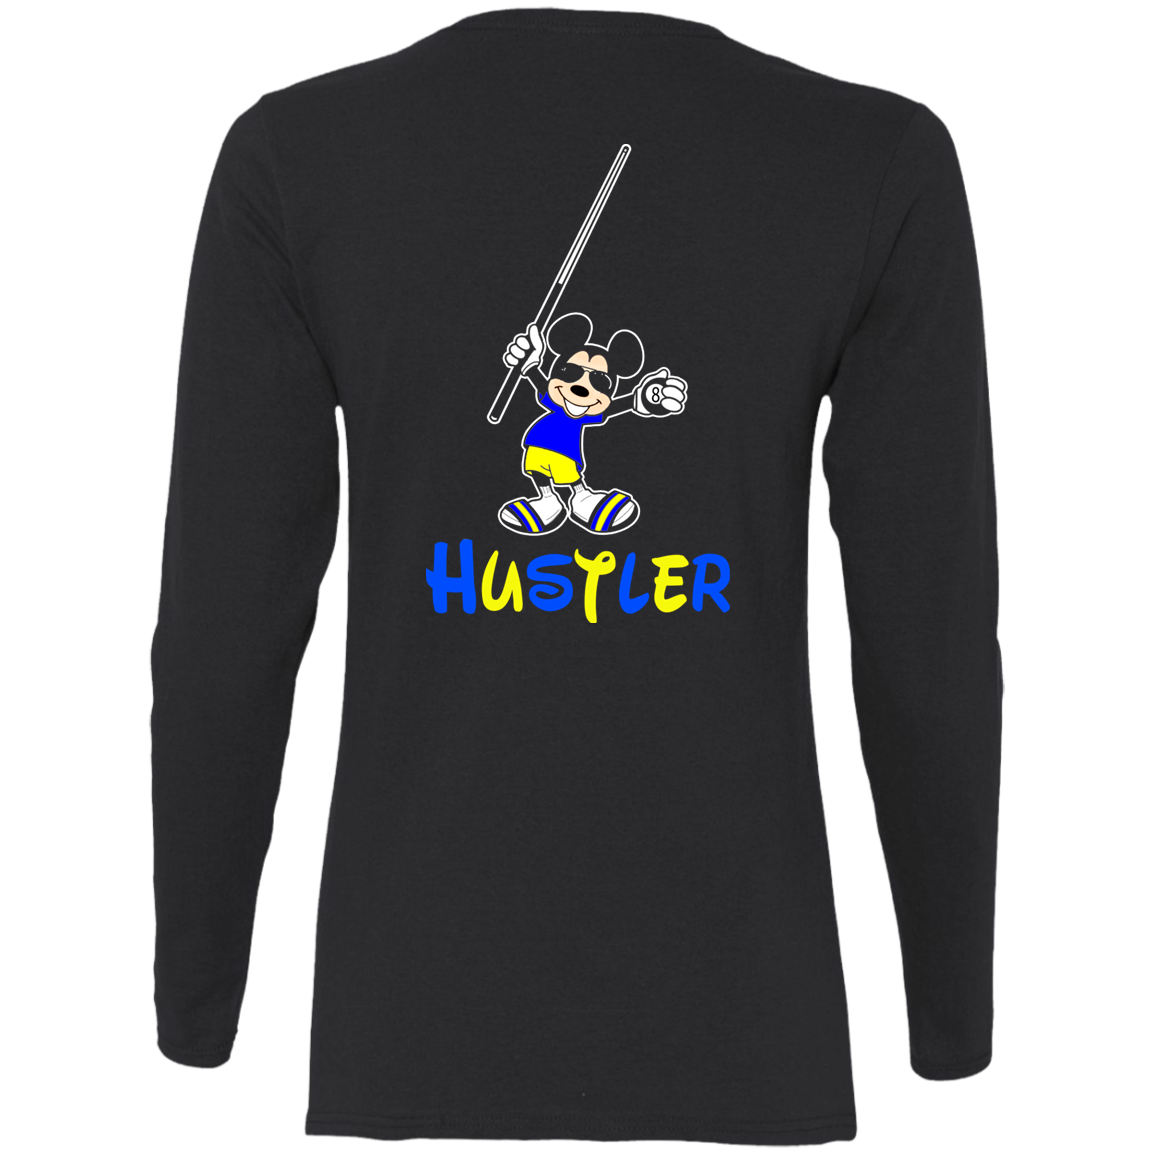 The GHOATS Custom Design #20. Look at the back. Hustle Mouse. Mickey Mouse Fan Art. Ladies' Basic 100% Cotton Long Sleeve